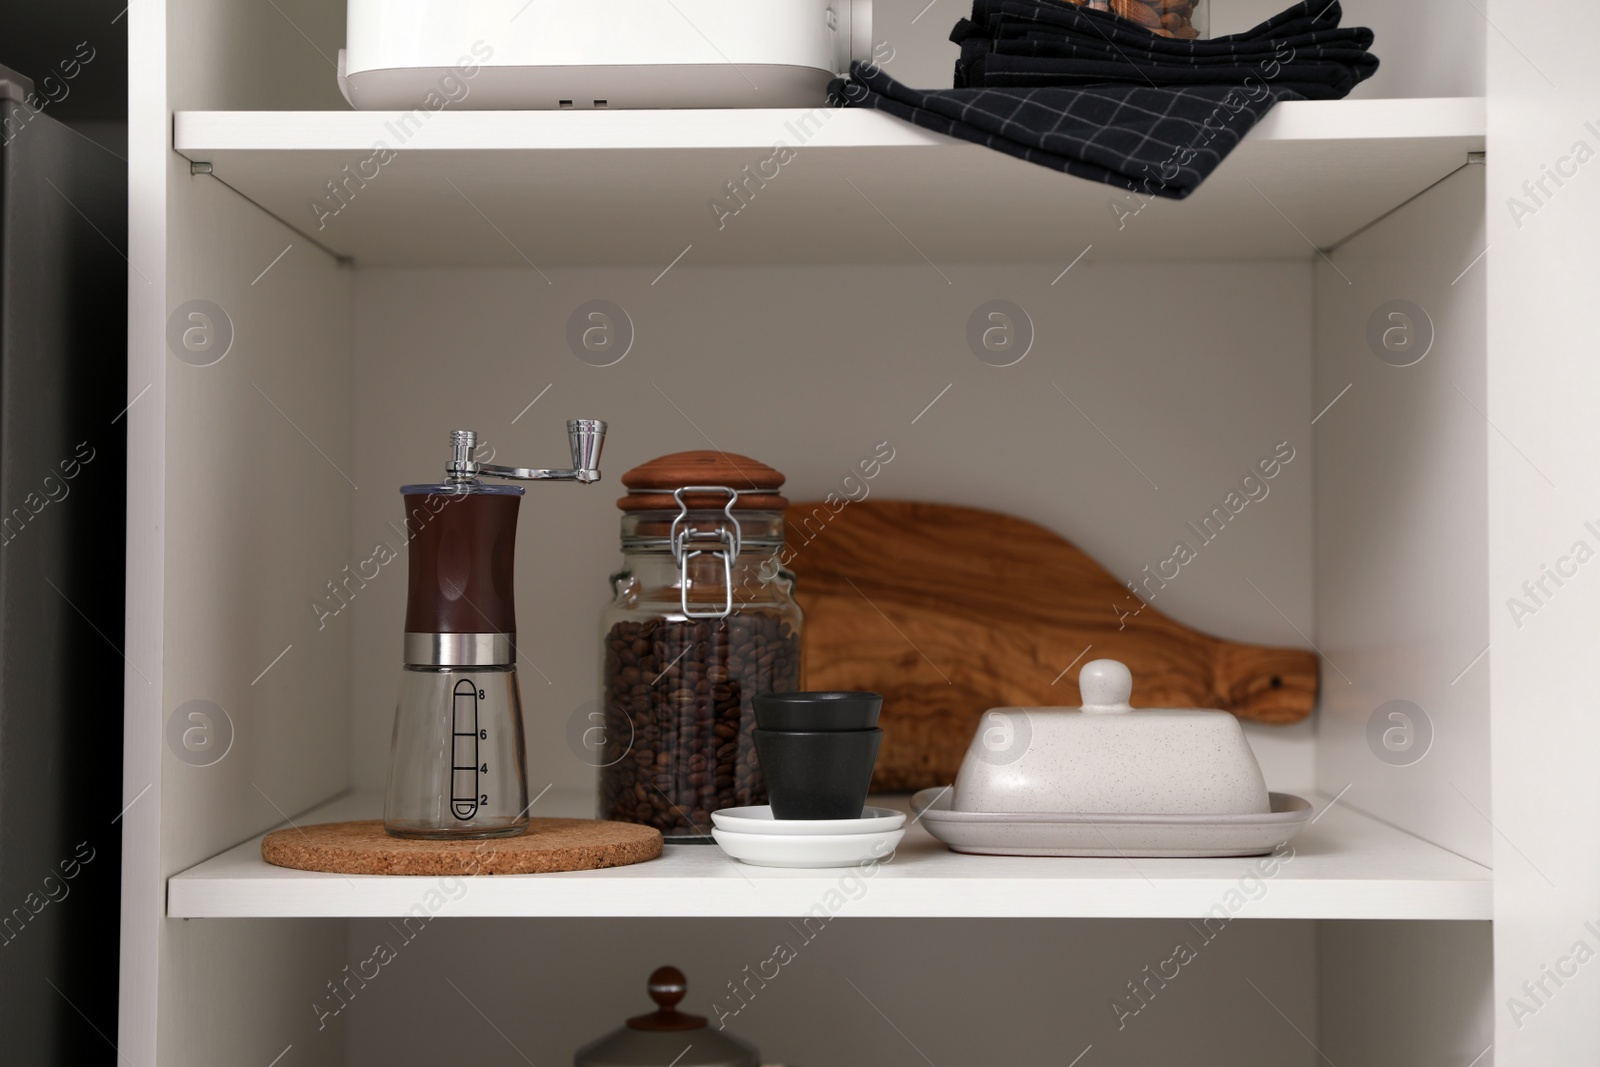 Photo of Manual coffee grinder and other appliances on shelving unit in kitchen